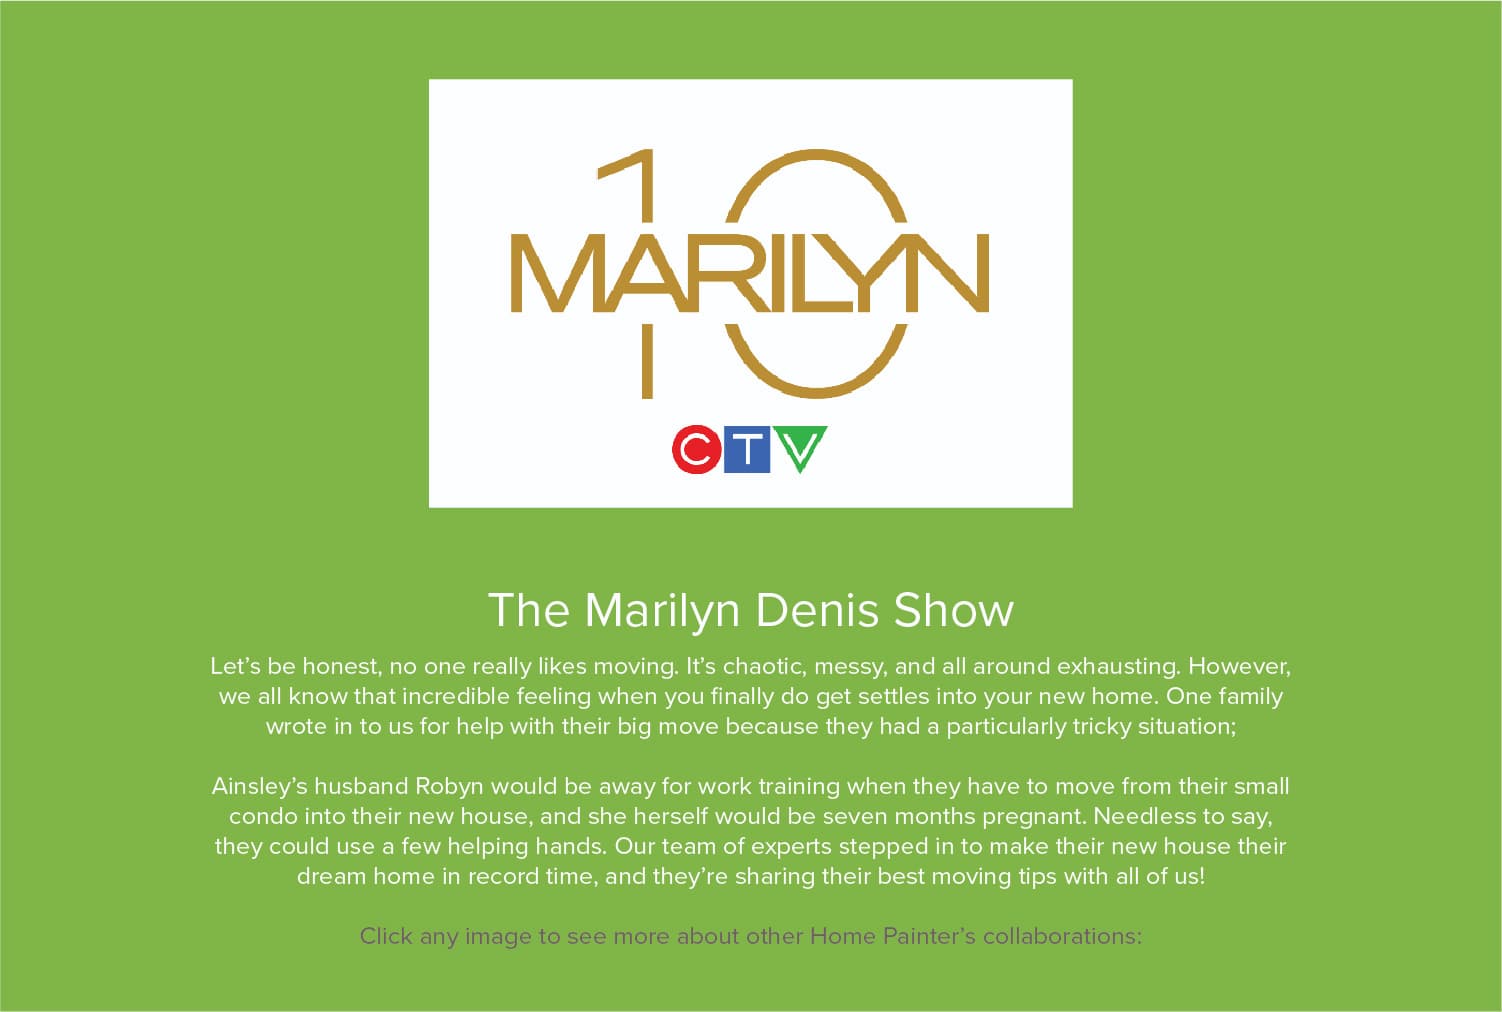 Home painter's collaboration with The Marilyn Denis Show